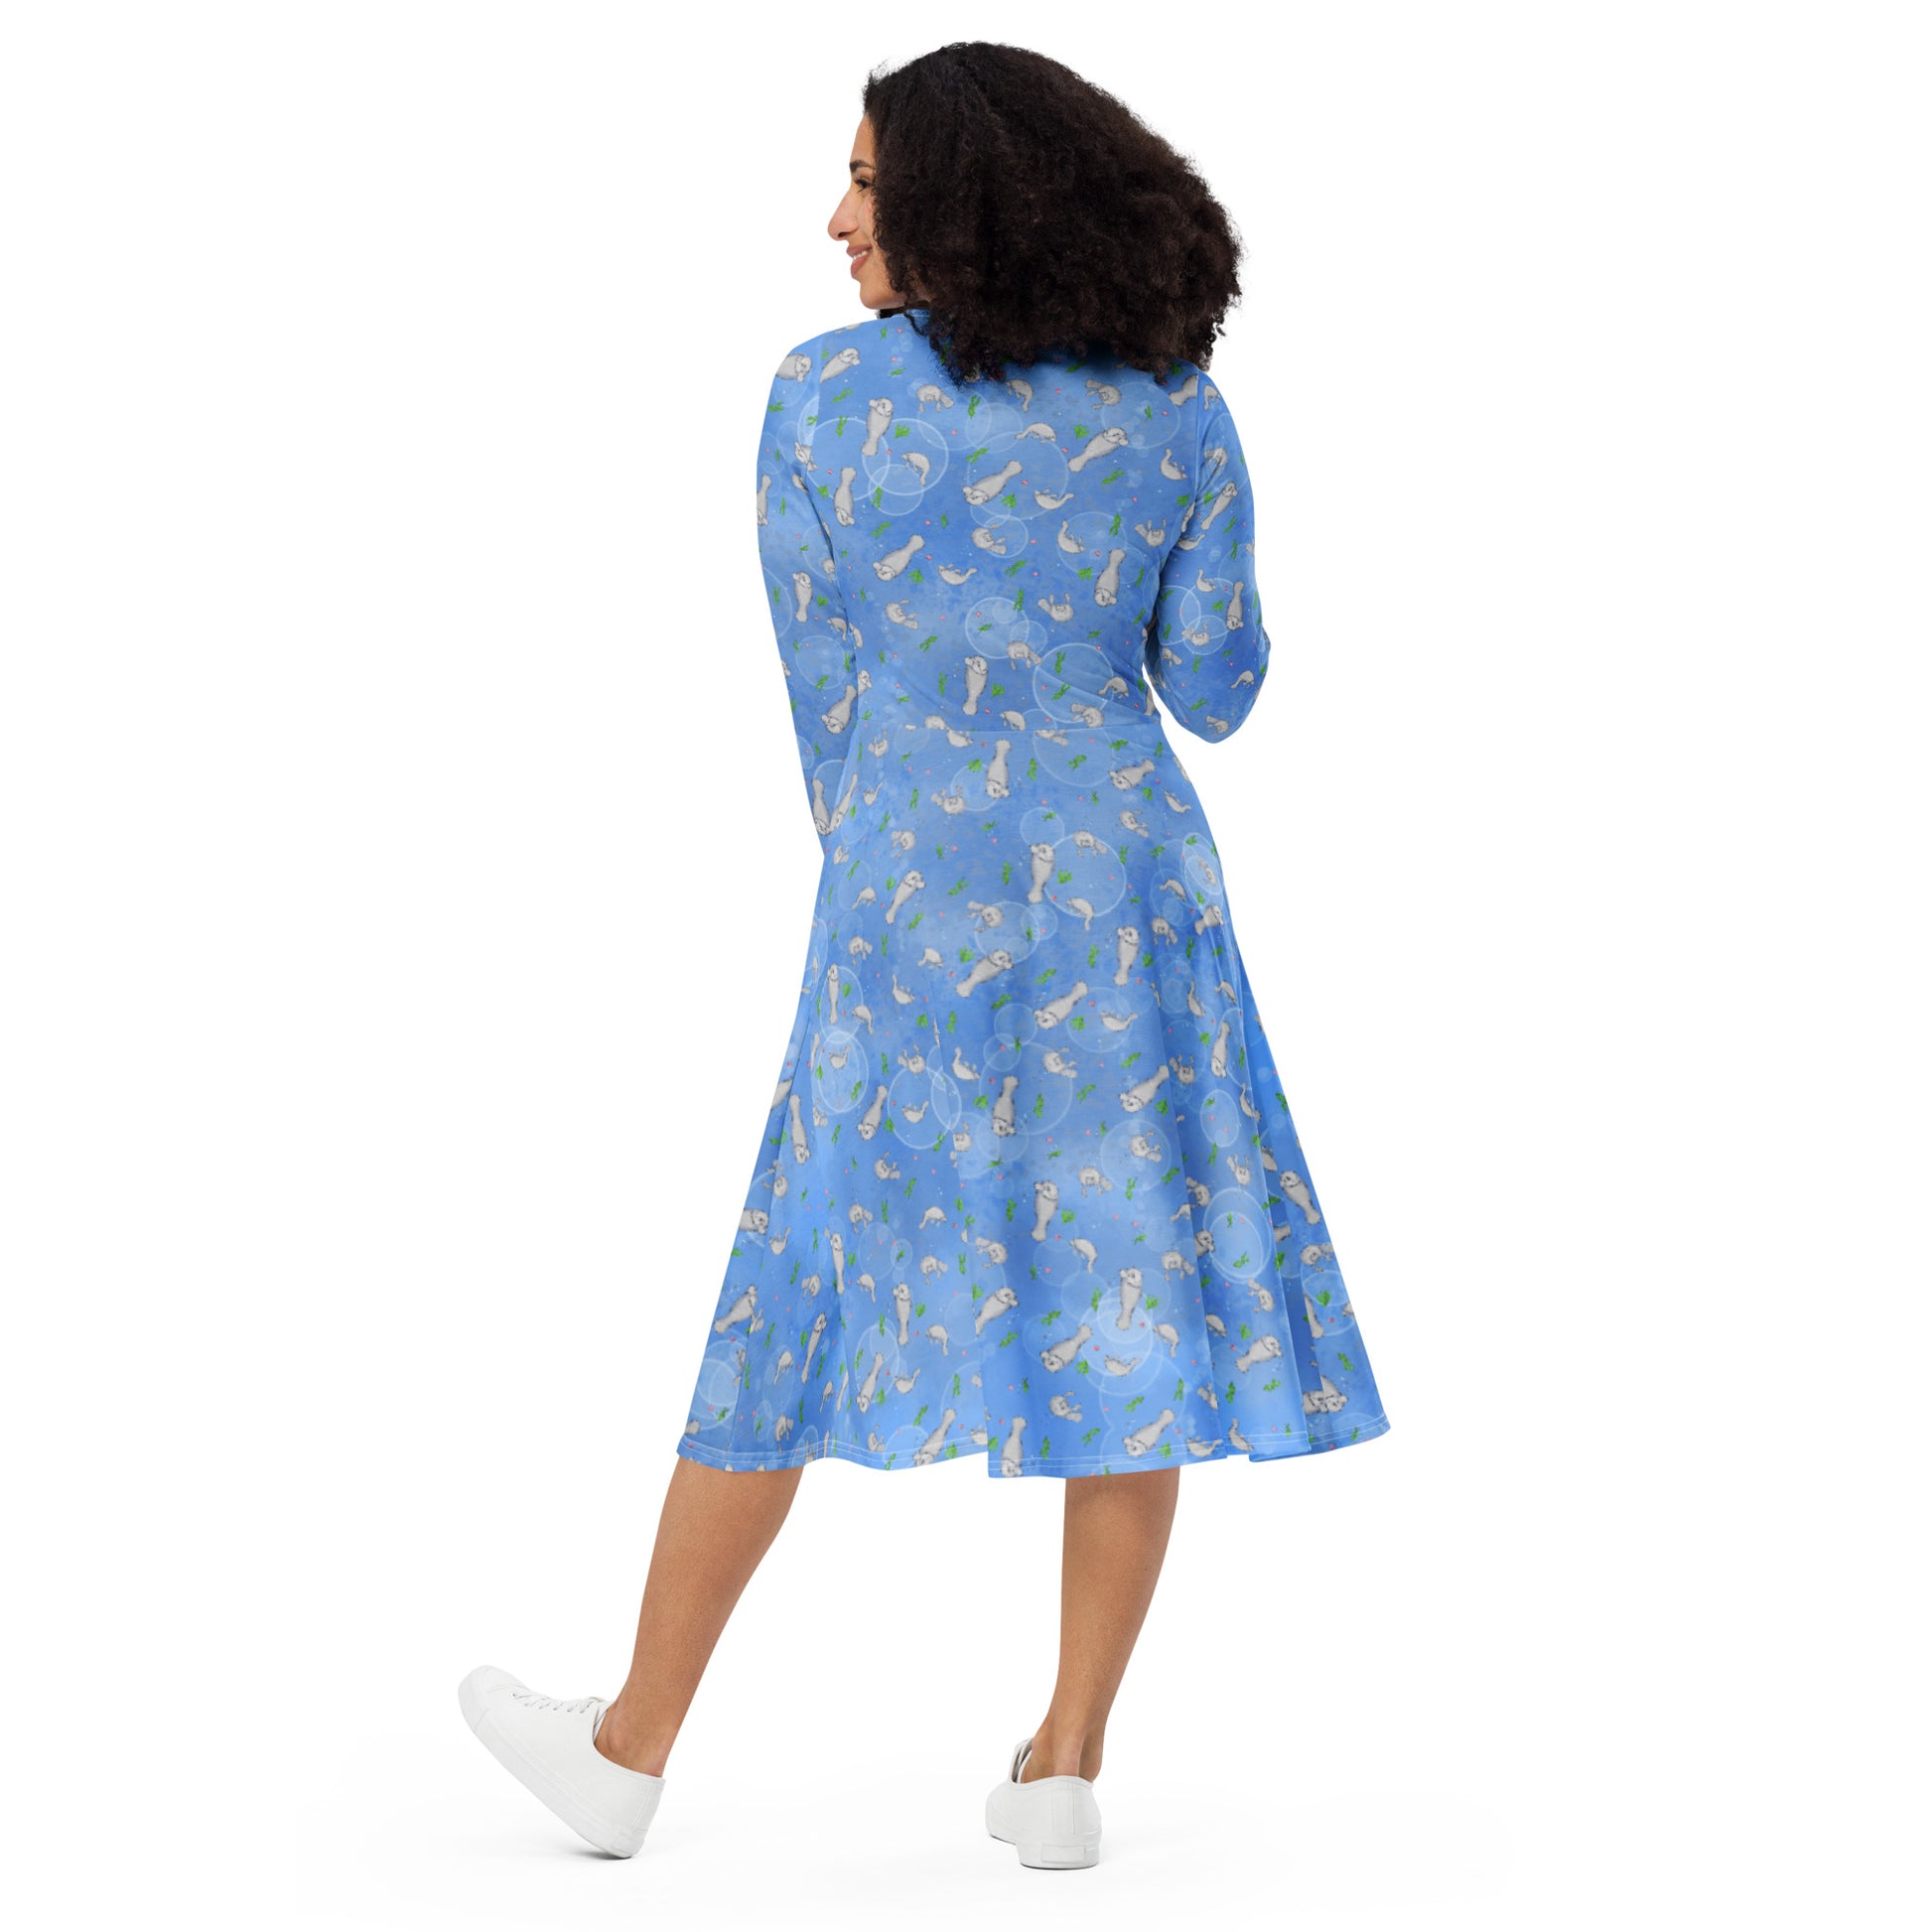 Long sleeve midi dress with fitted waist, flared bottom, and side pockets. Features a patterned design of manatees, seashells, seaweed, and bubbles on an ocean blue background. Back view on female model.